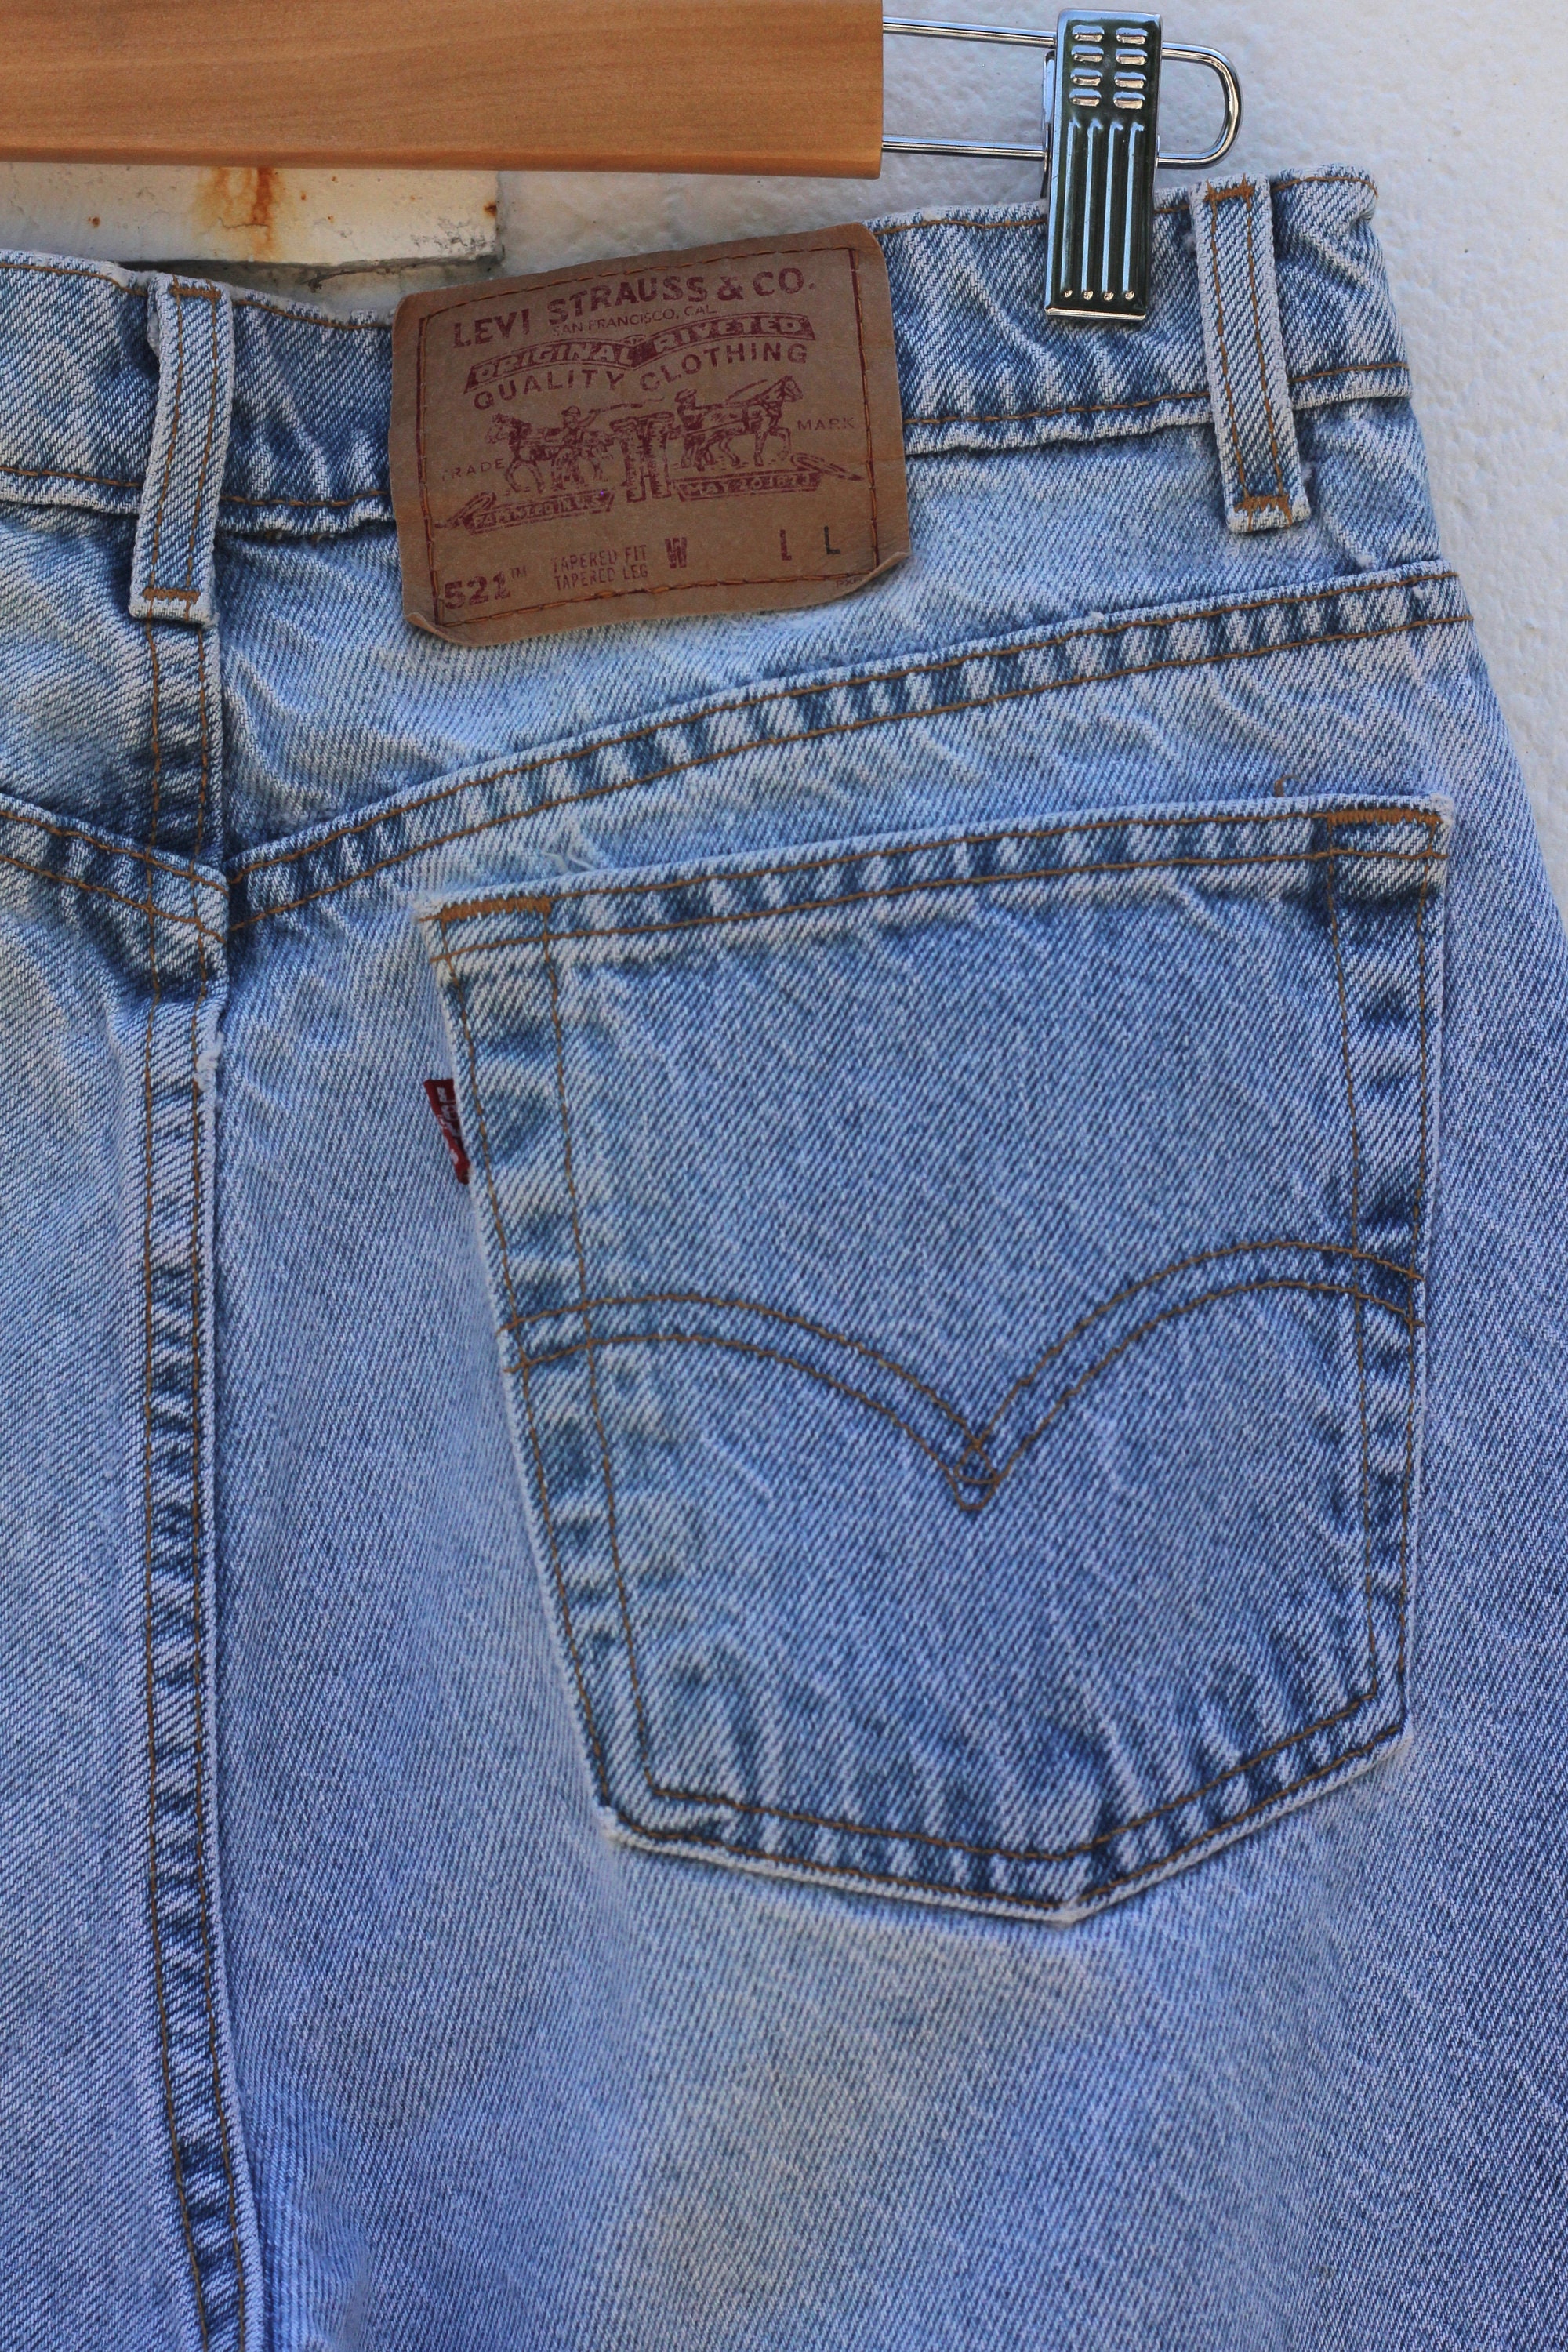 Women's Jeans Levi's Red Tab 521 Made in the USA Faded Size 16 Long ...